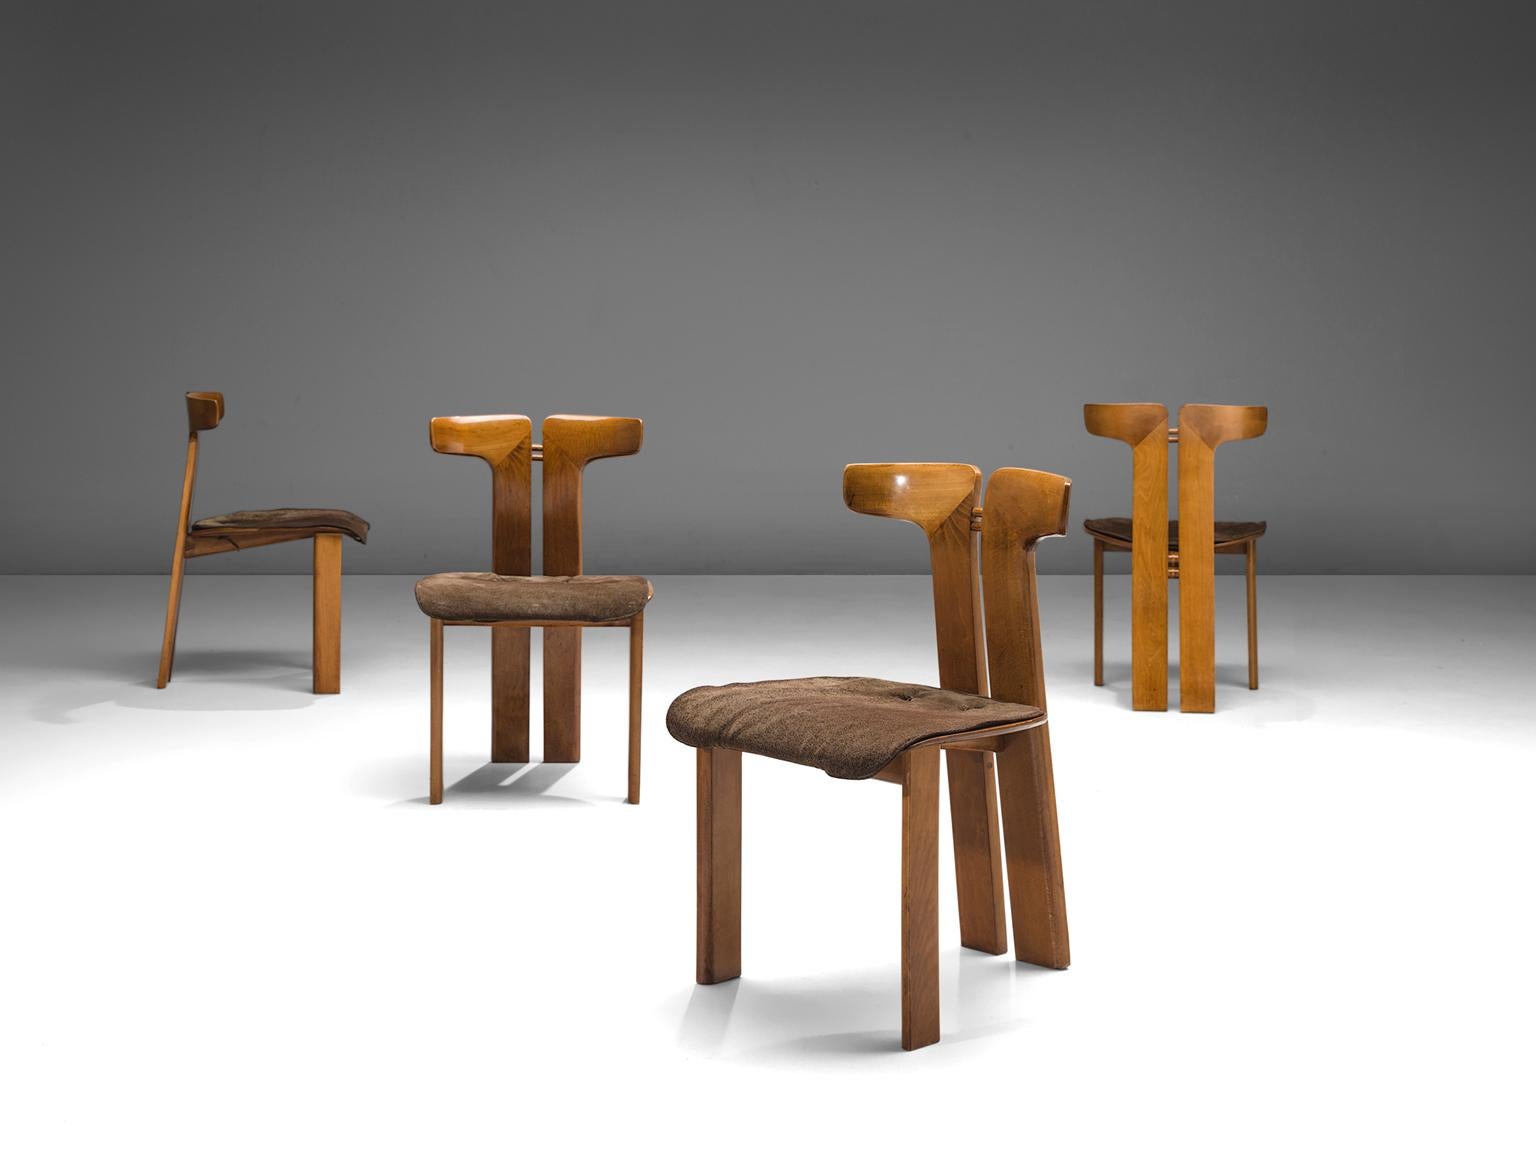 Pierre Cardin, set of four chairs, walnut and suede, Italy, 1980.

This set of sculptural chairs is designed by Pierre Cardin. The curve of the back highlights the qualities of the form of the wood in an unparalleled manner. These organic lines